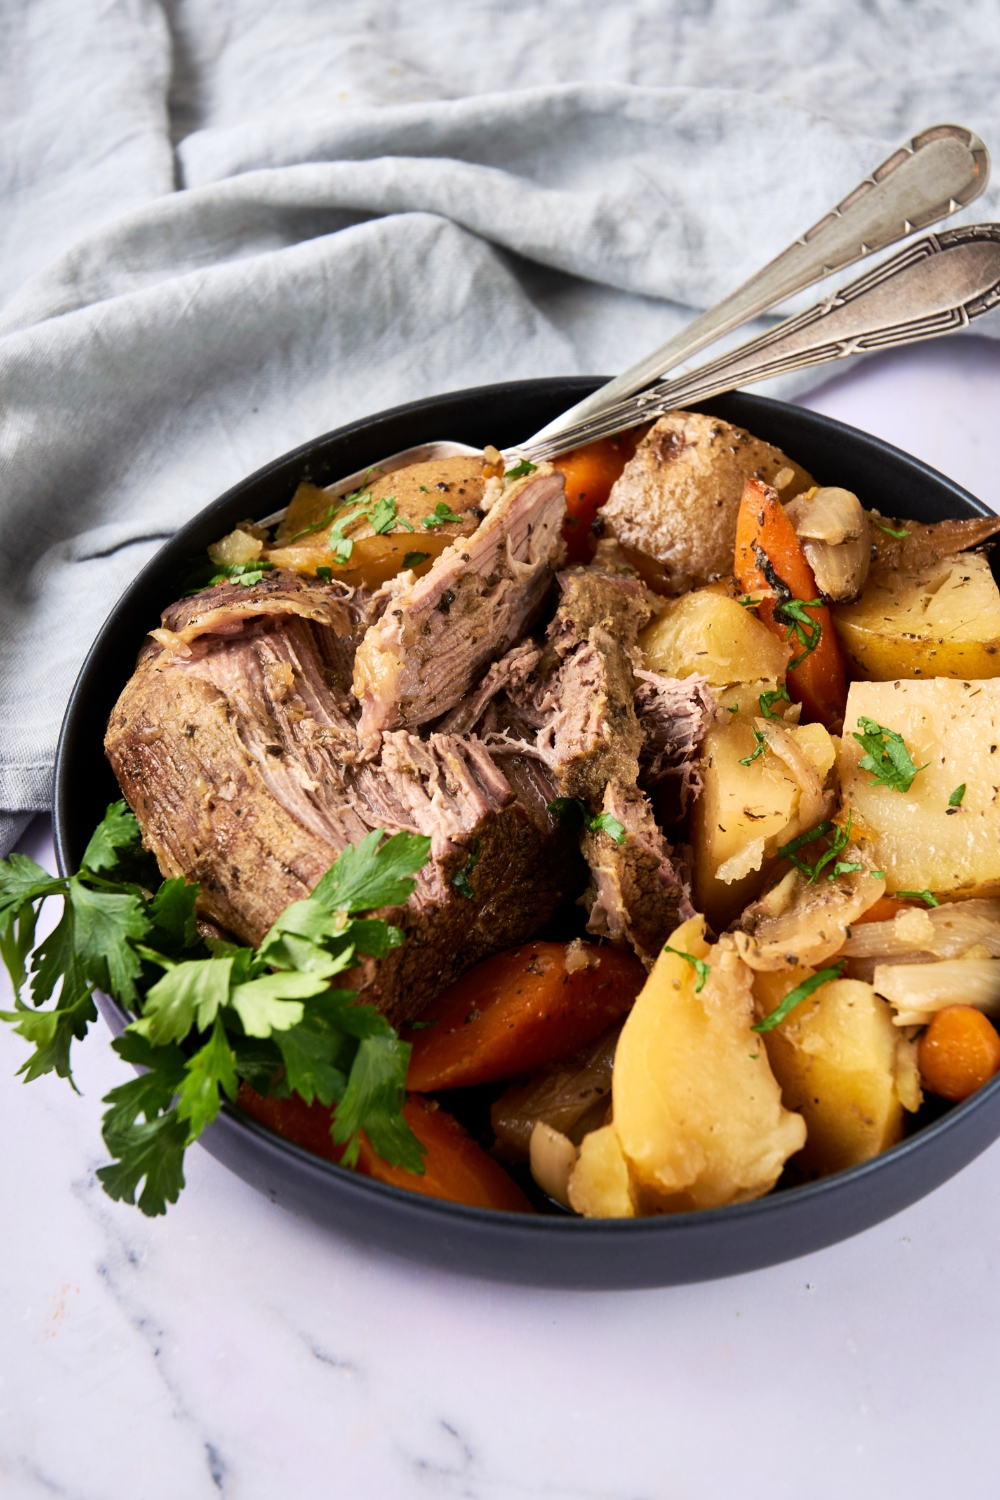 Two serving utensils sit in a full dish of roast and veggies.